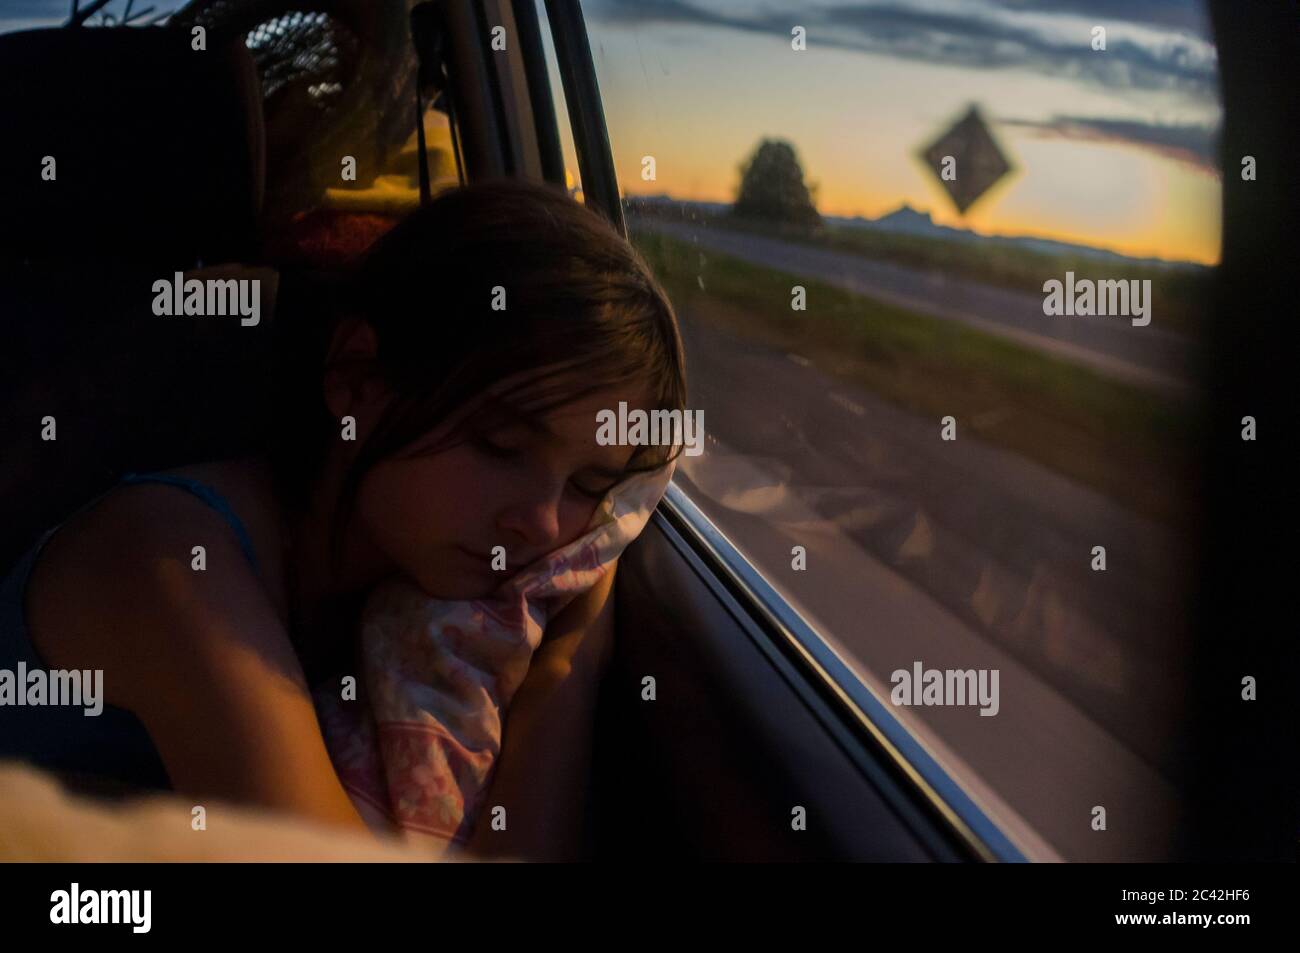 A young girl sleeping in the back of a car with her head on the window Stock Photo